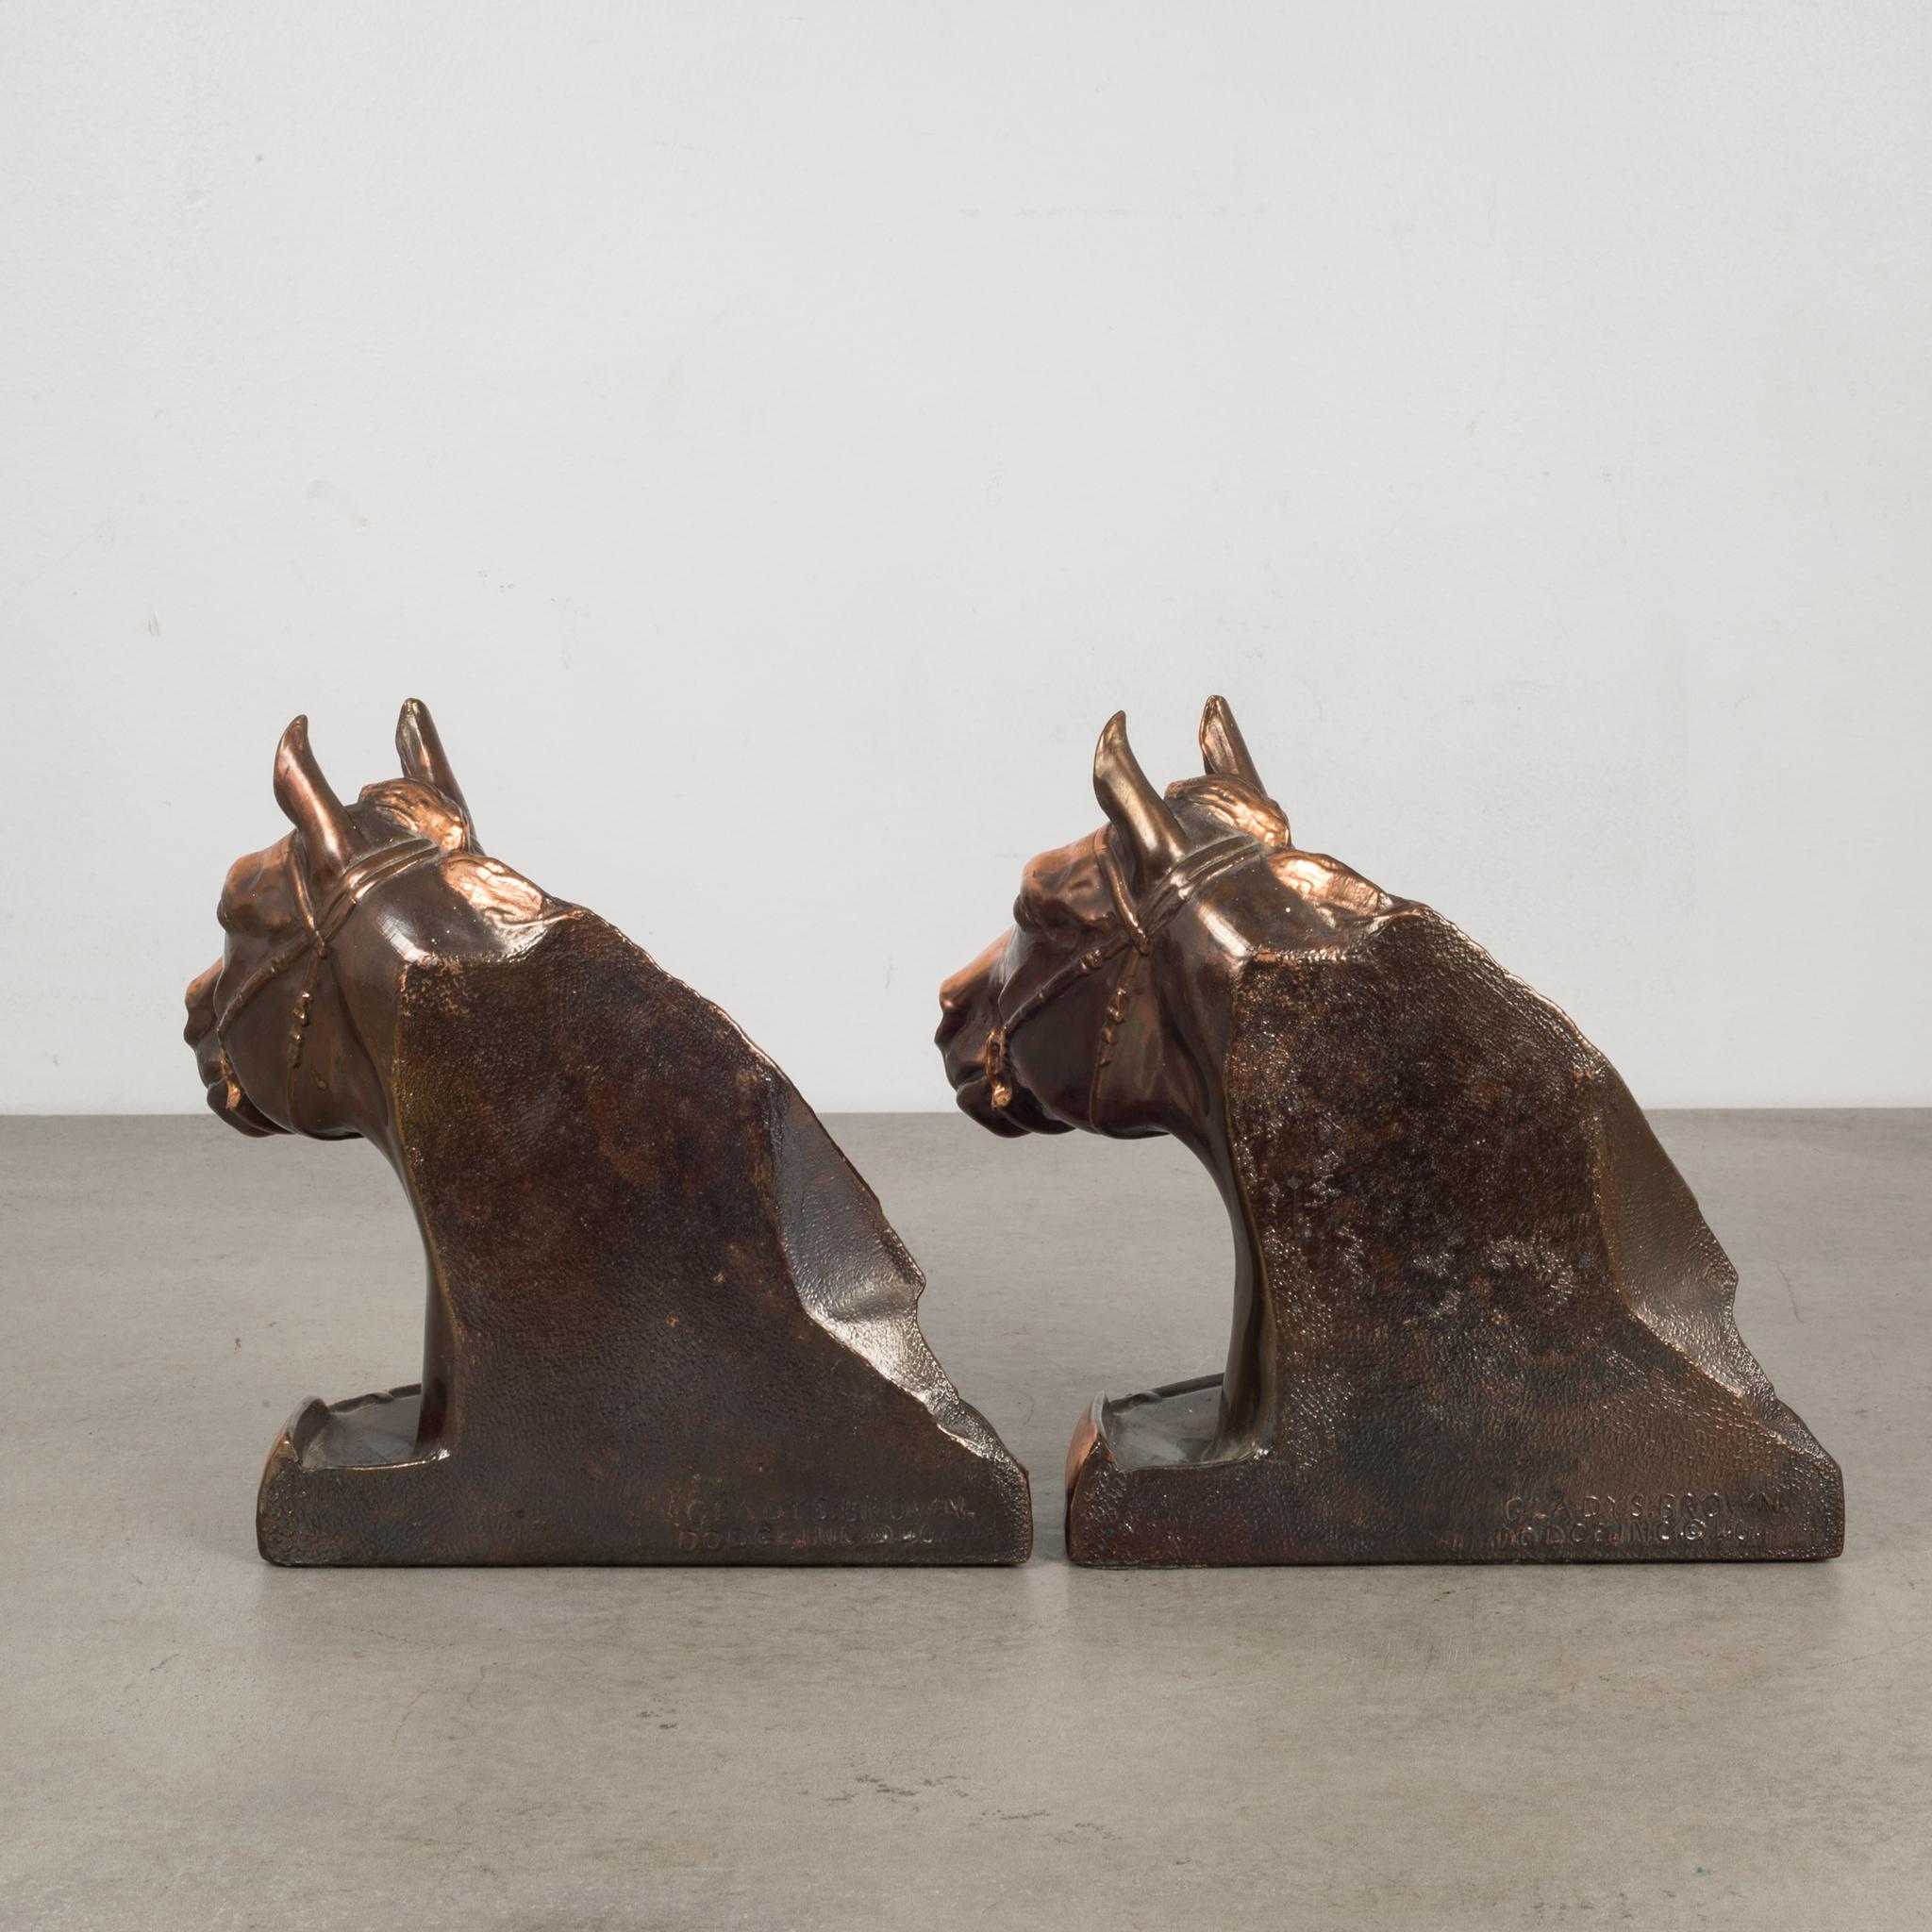 American Bronze-Plated Horse Head Bookends by Glady's Brown and Dodge, circa 1946